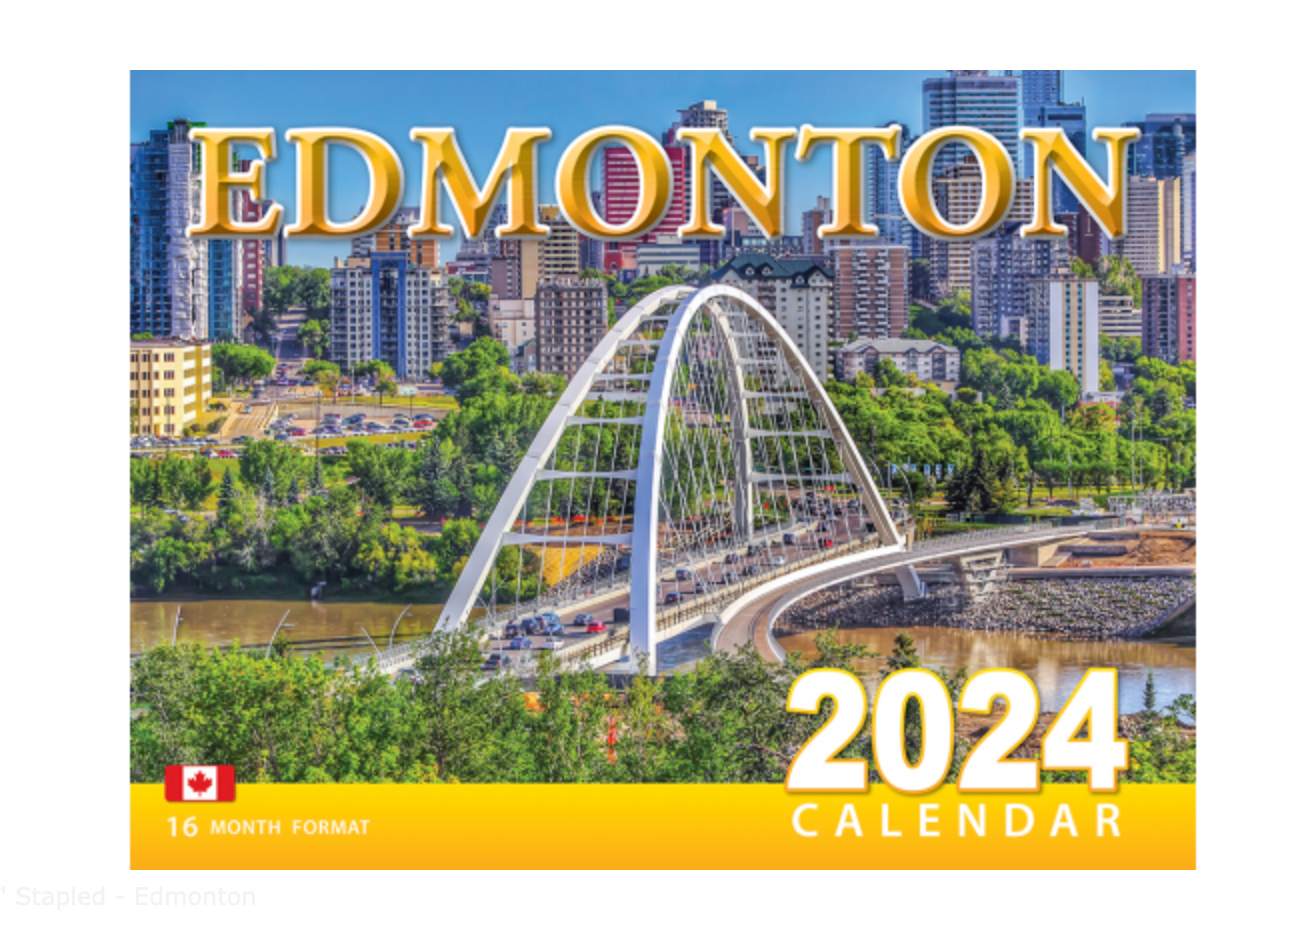 Discover the Beauty of Edmonton with the 2024 Calendar BIGGLE